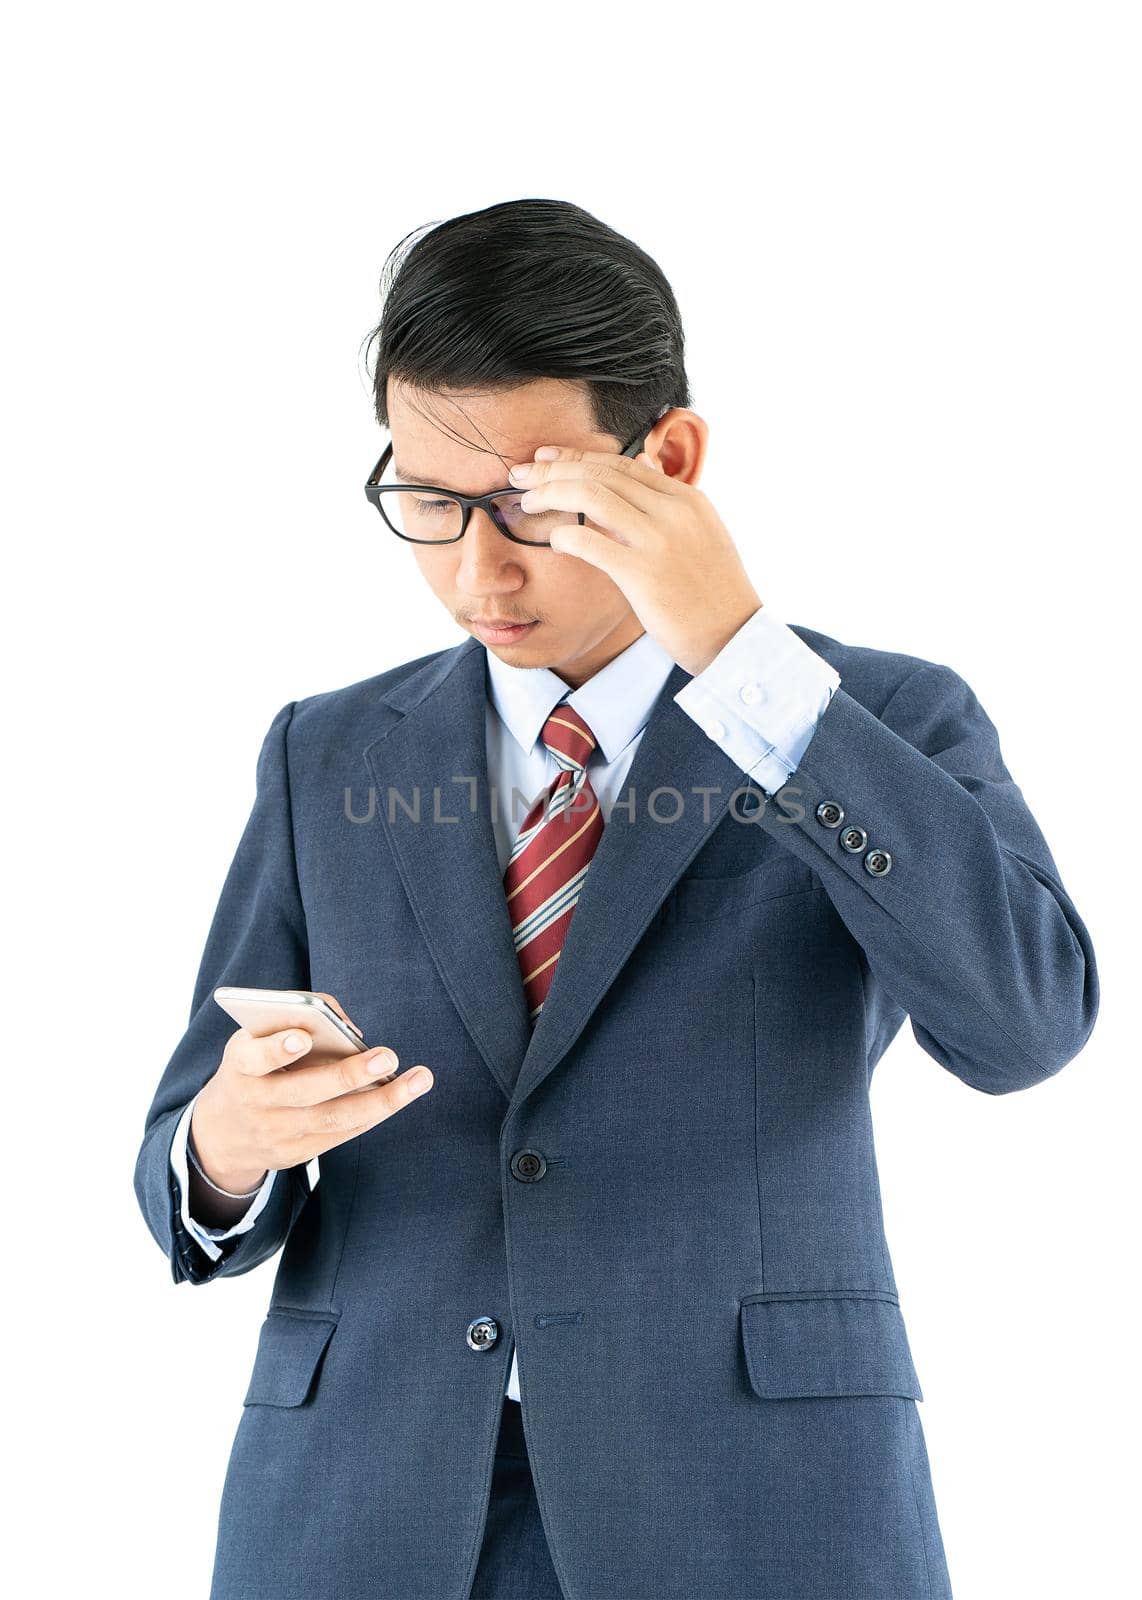 Businessman in suit holding a smartphone over white background